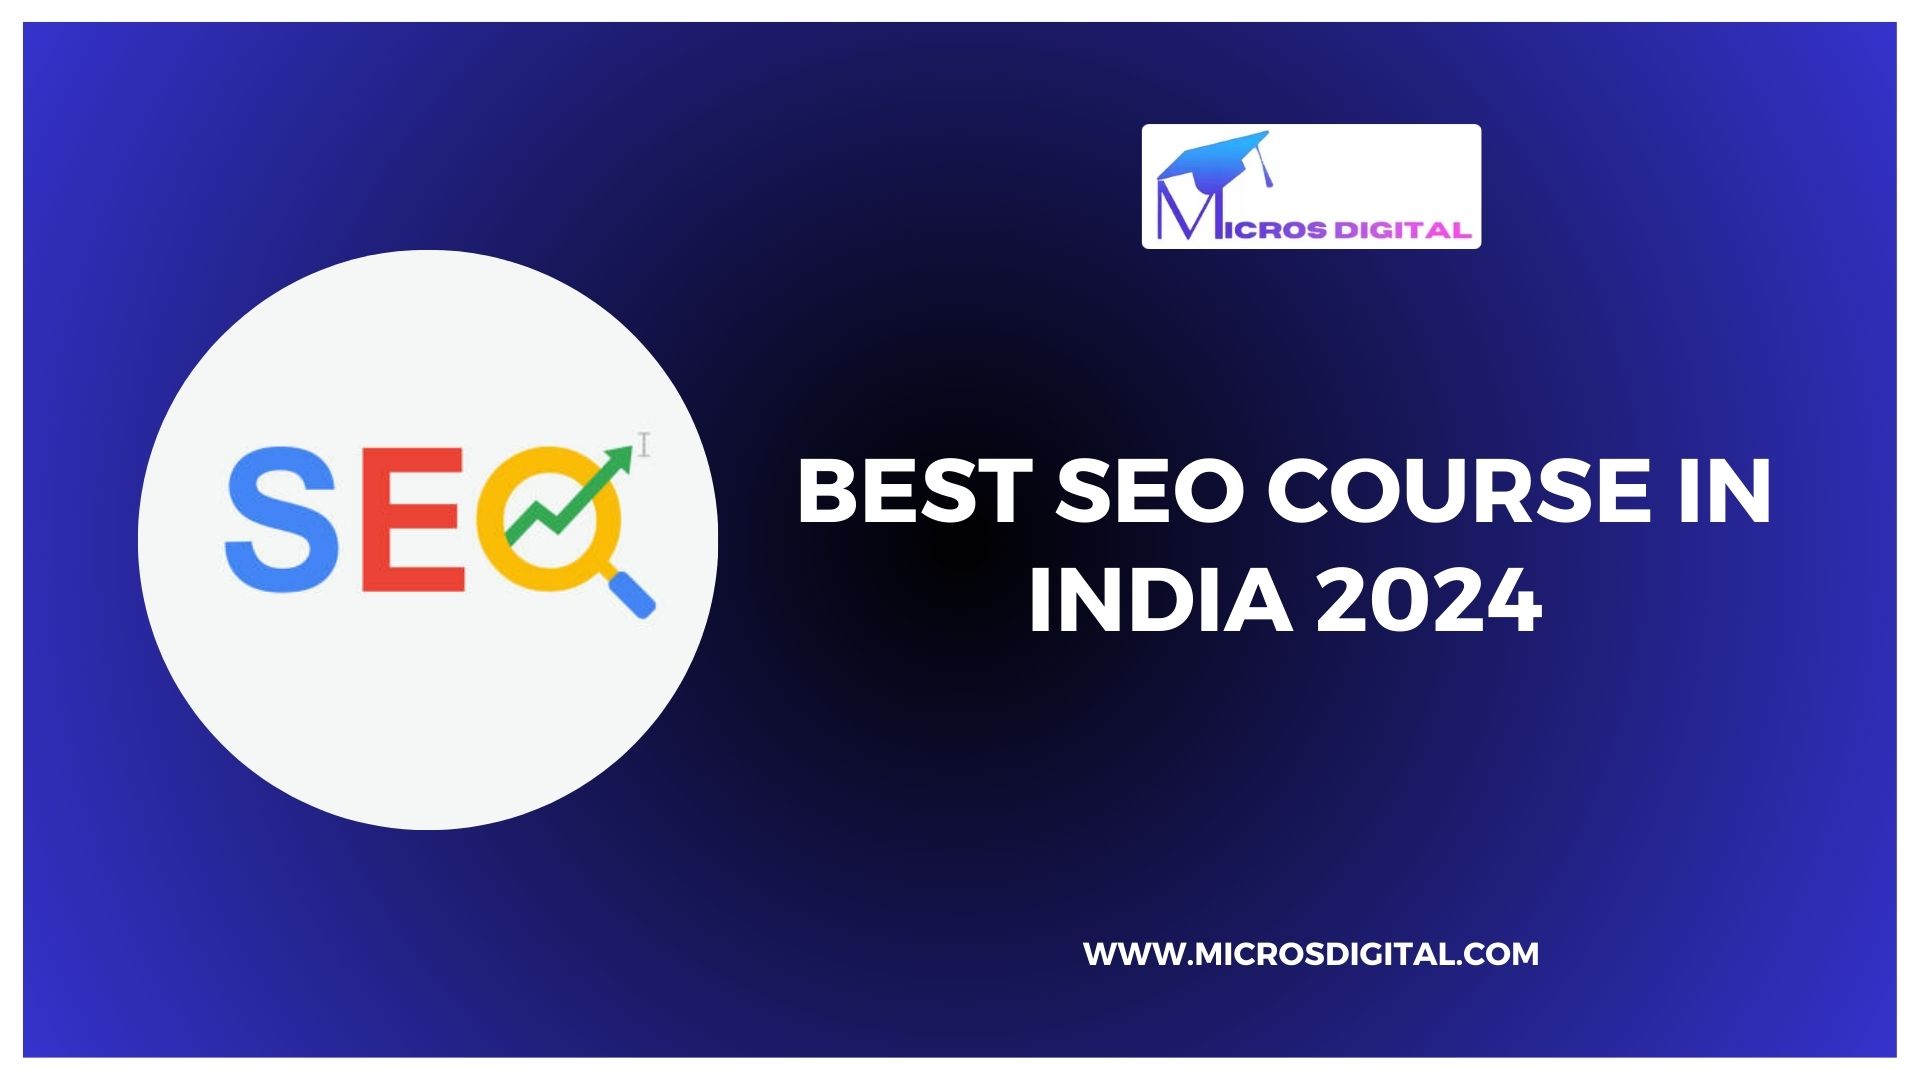 Best SEO course in India 2024